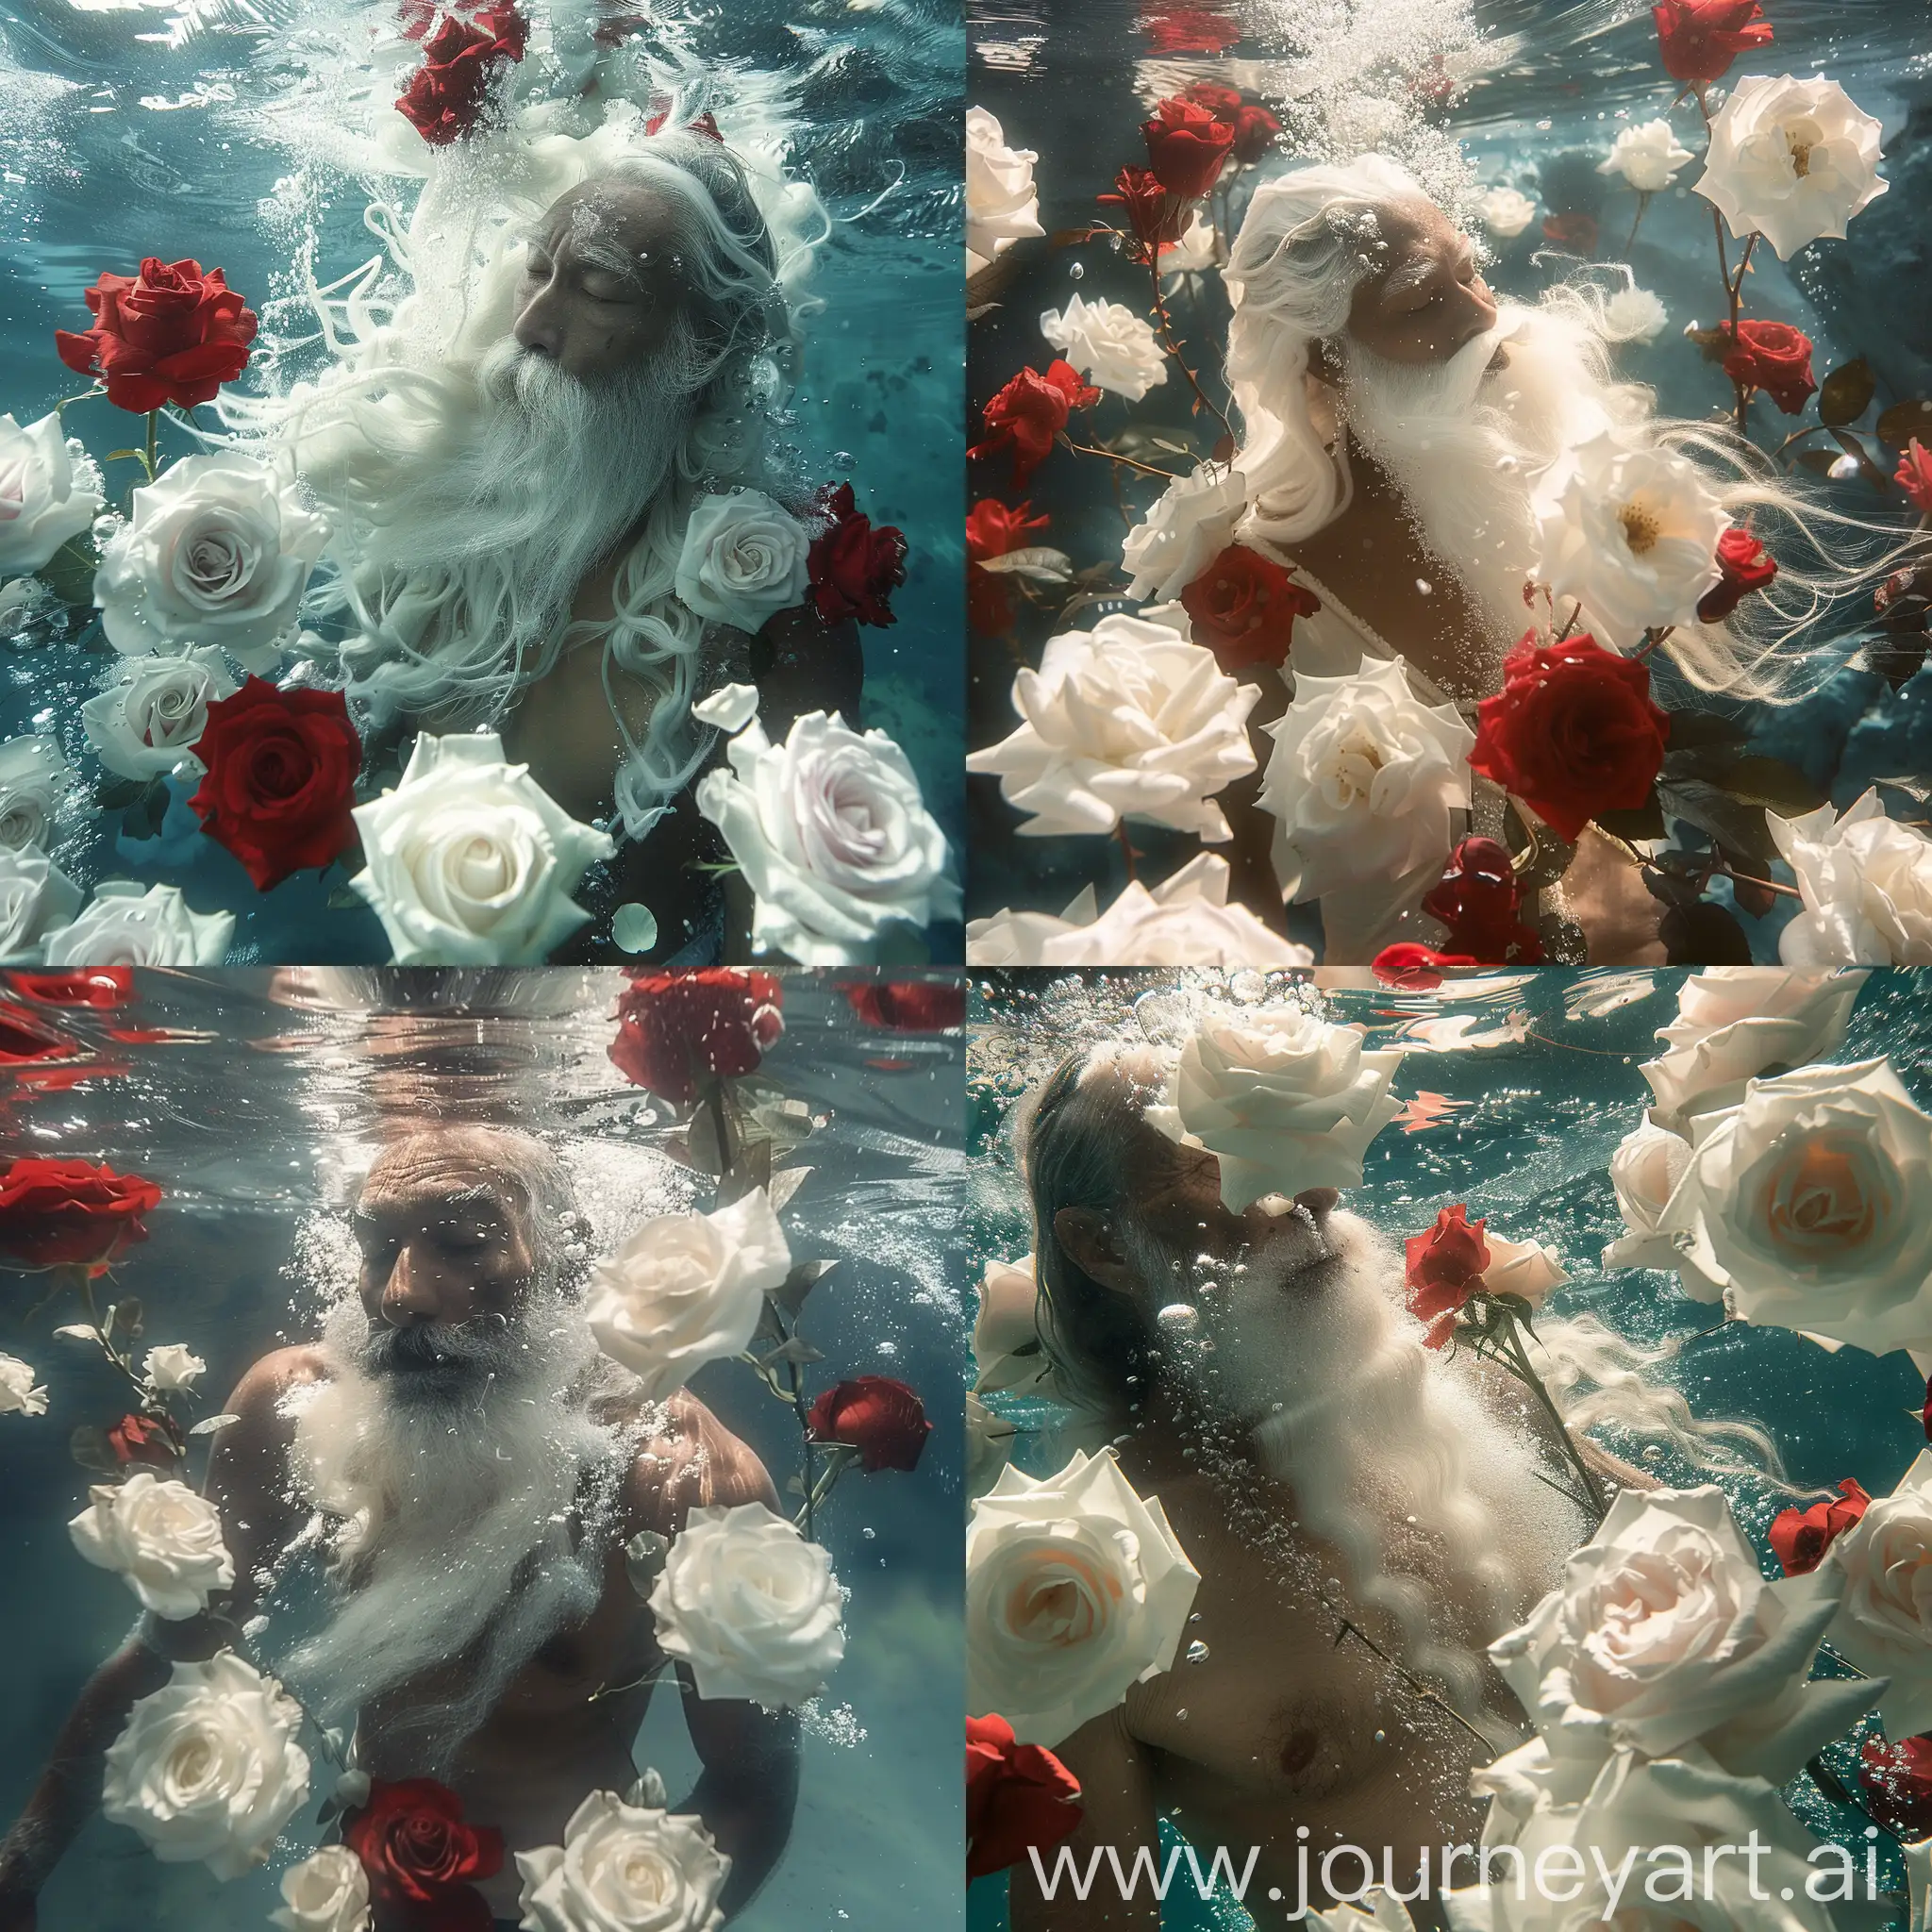 Enchanting-Underwater-Scene-with-Bearded-Man-and-Roses